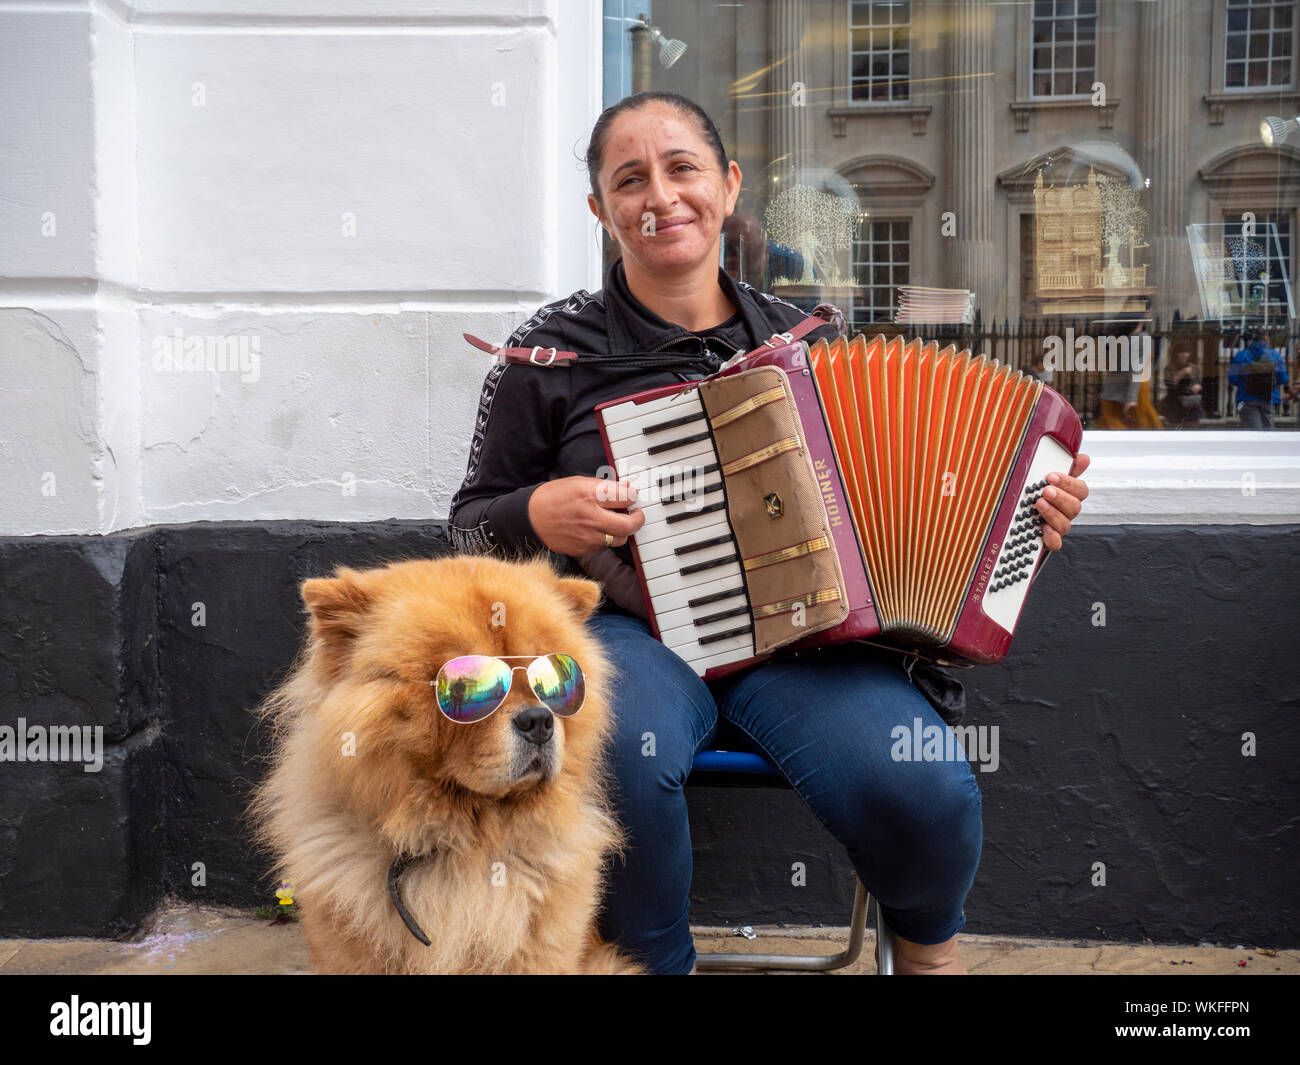 A woman busker busking with an accordion accompanied by a cute dog wearing sunglassses in a street in Cambridge UK Stock Photo